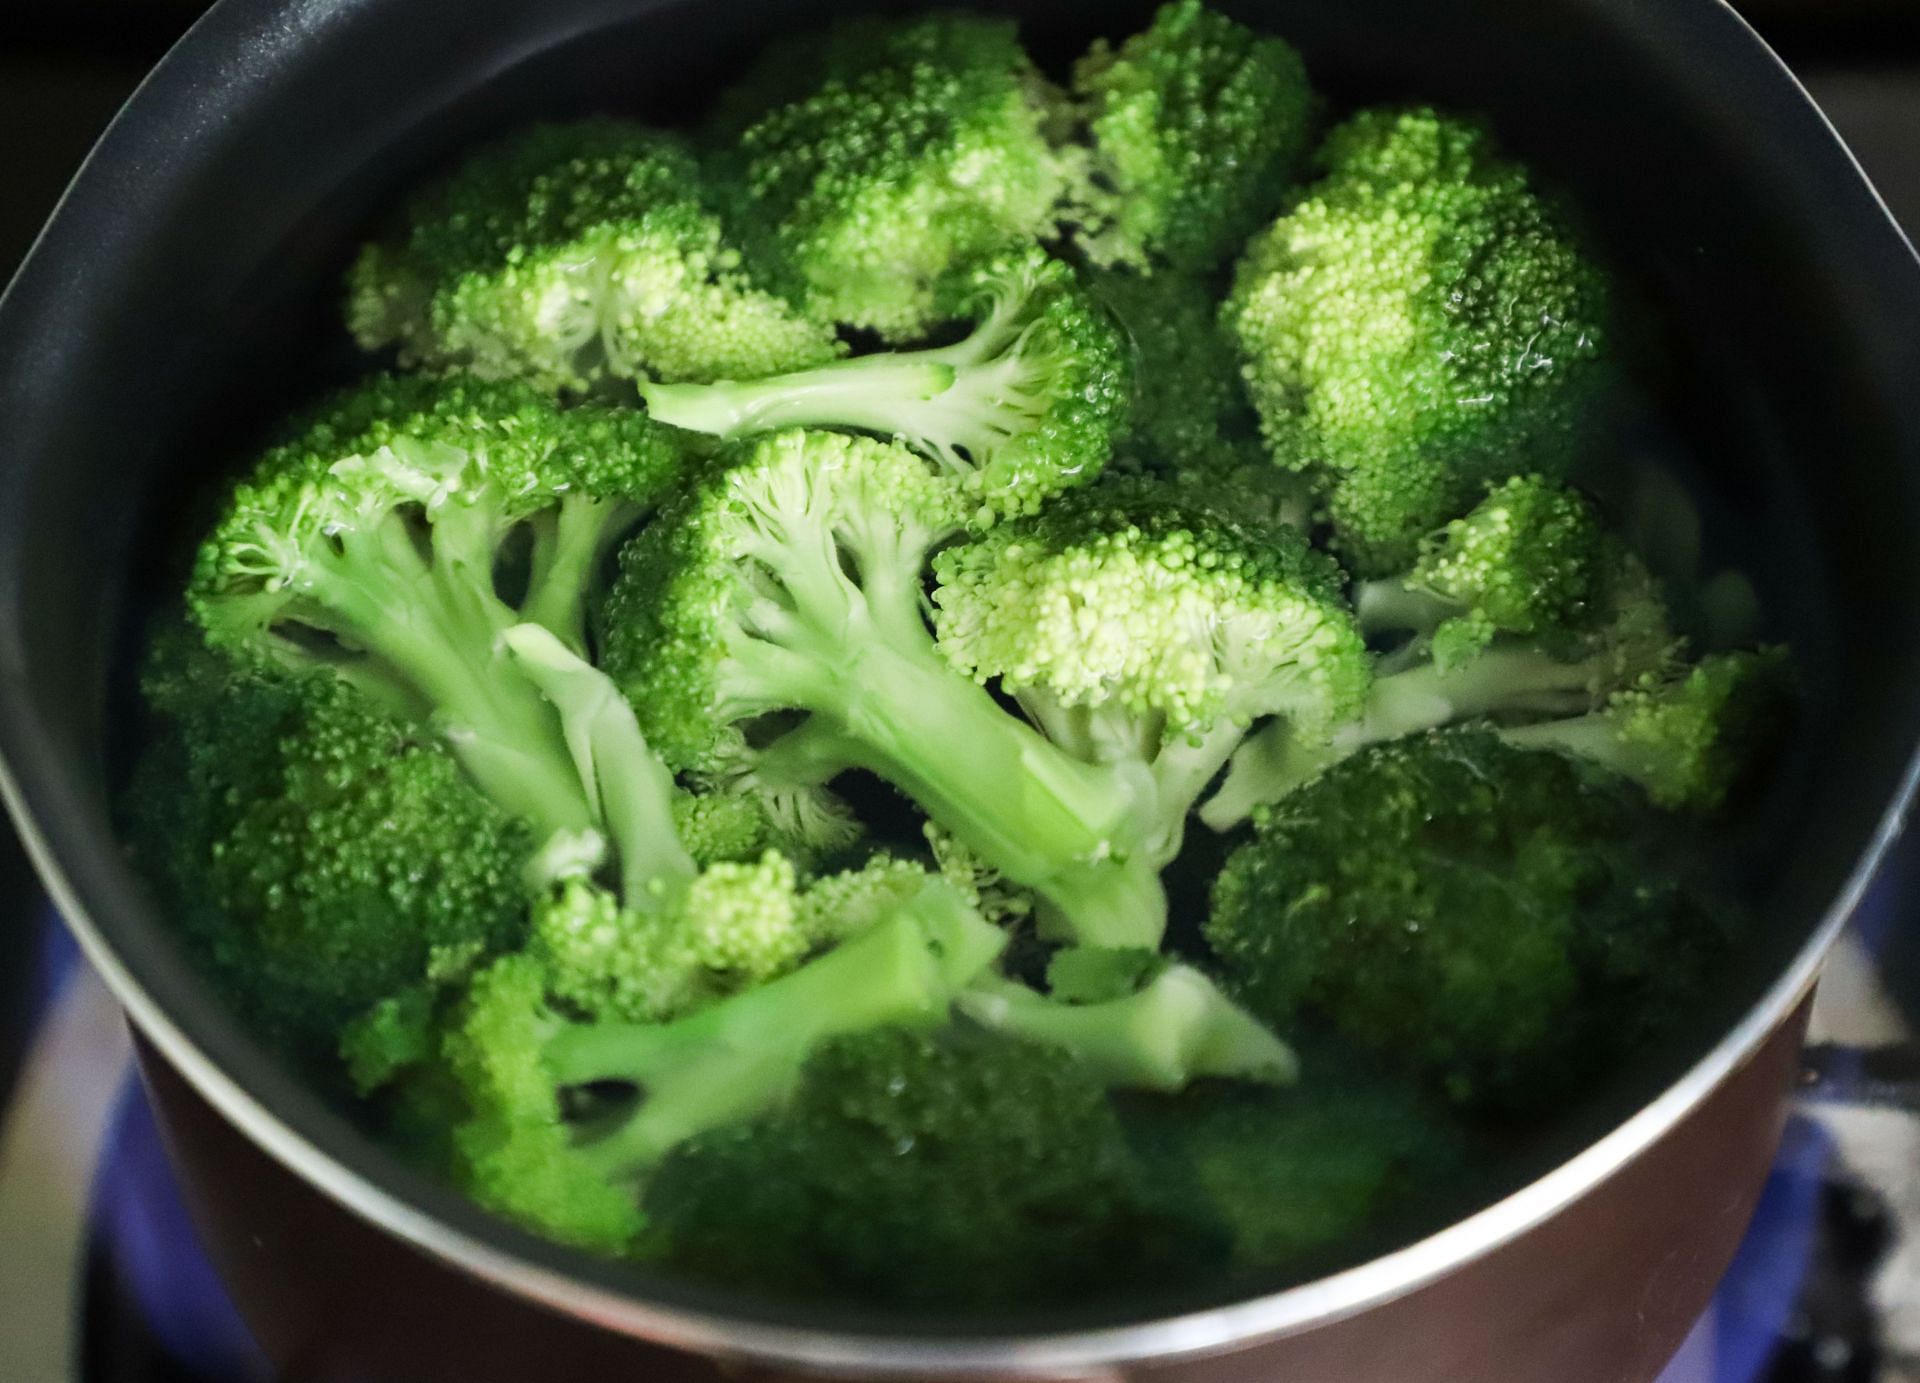 What are the health benefits of broccoli? (Image via Pexels)